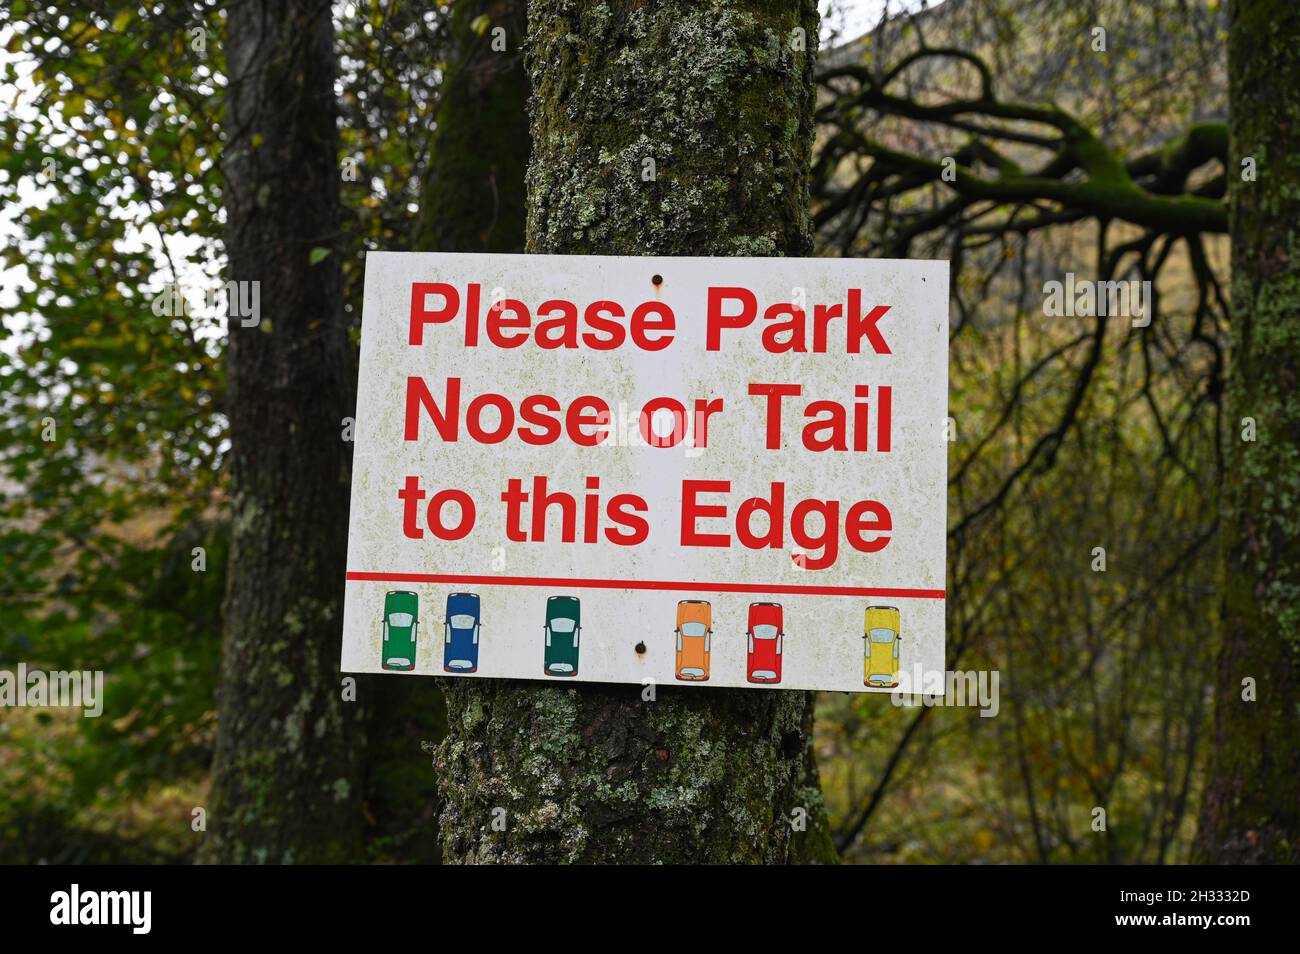 Text 'Please park nose or tail to this edge' with car icons. Heavily blurred forest background. Taken Red Squirrel Campsite, Glencoe, Scotland Stock Photo